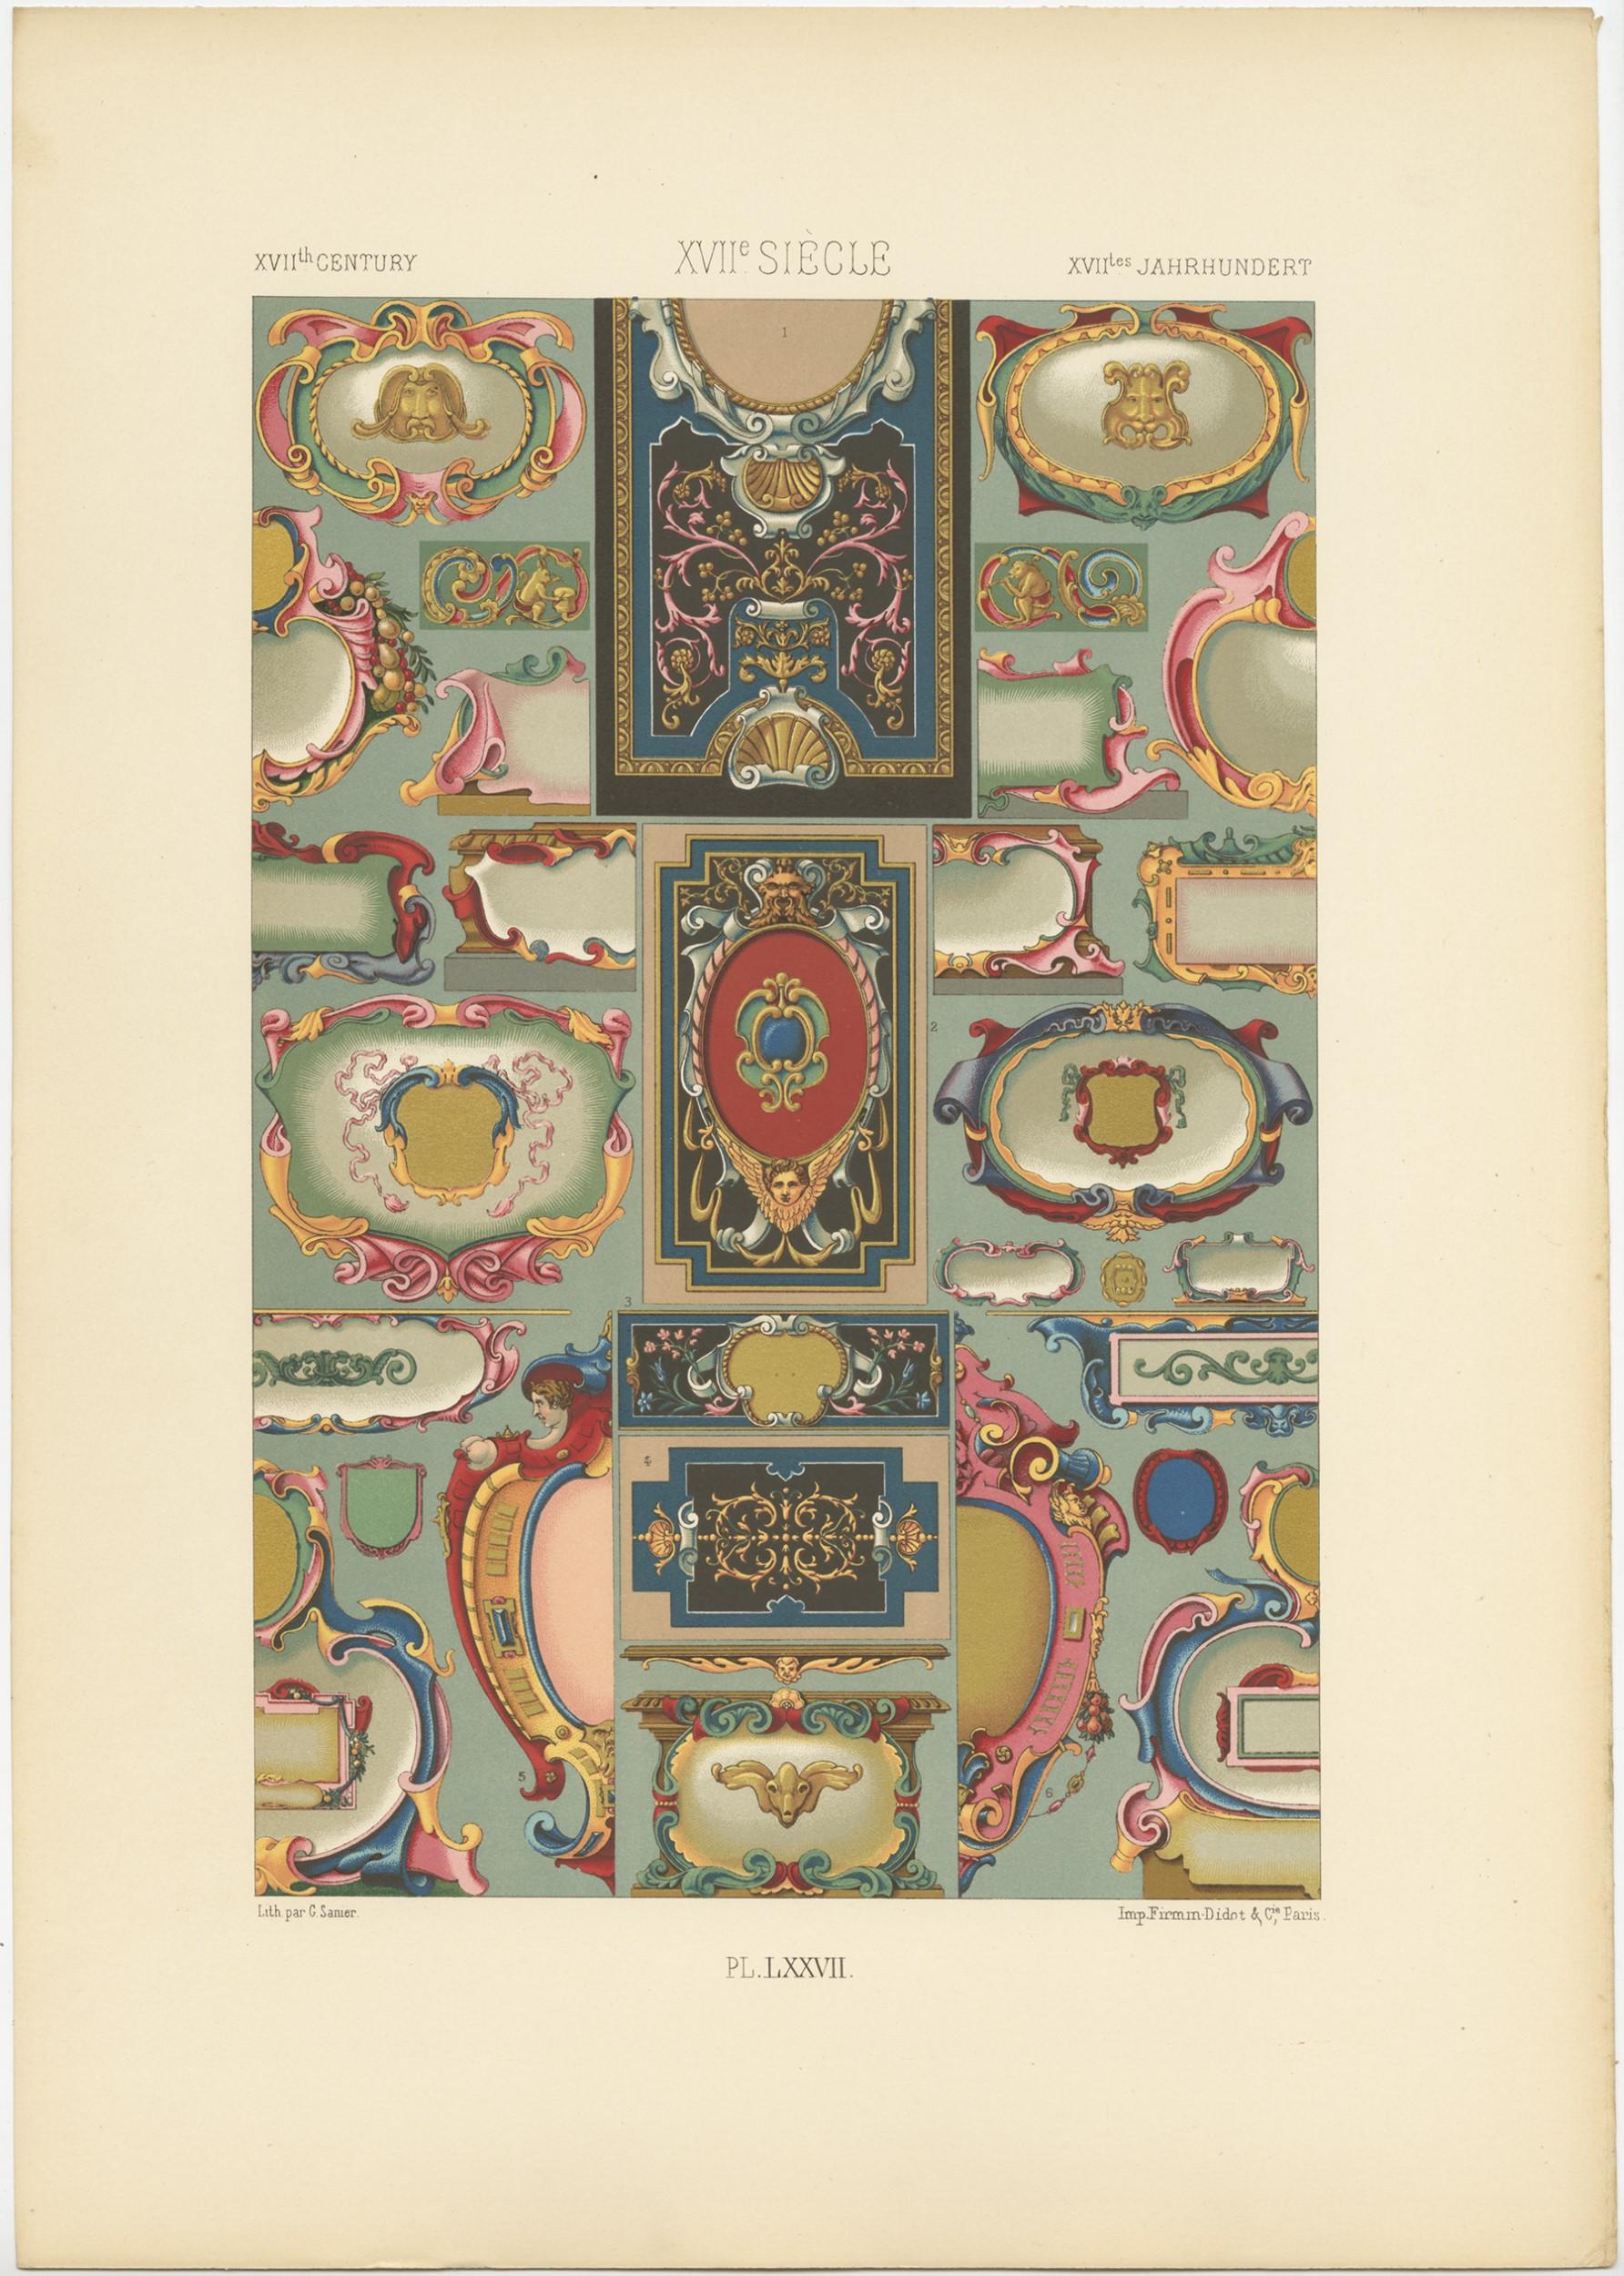 Antique print titled ' XVIIth Century - XVIIe Siecle - XVIItes Jahrhundert'. Chromolithograph of 17th century ornaments and decorative arts. This print originates from 'l'Ornement Polychrome' by Auguste Racinet. Published, circa 1890.